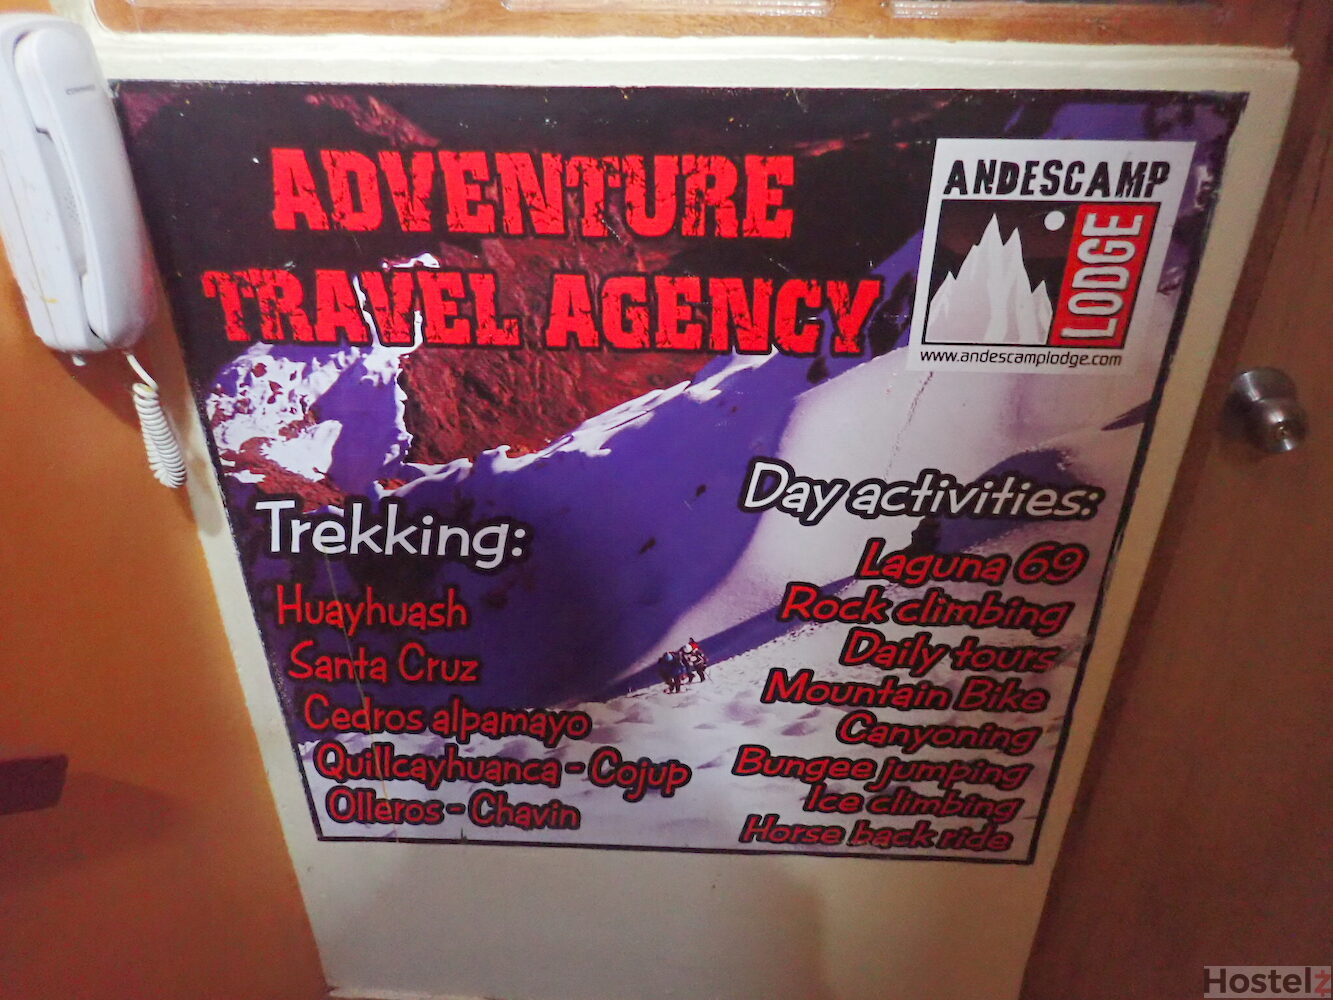 There is an in-house travel agency